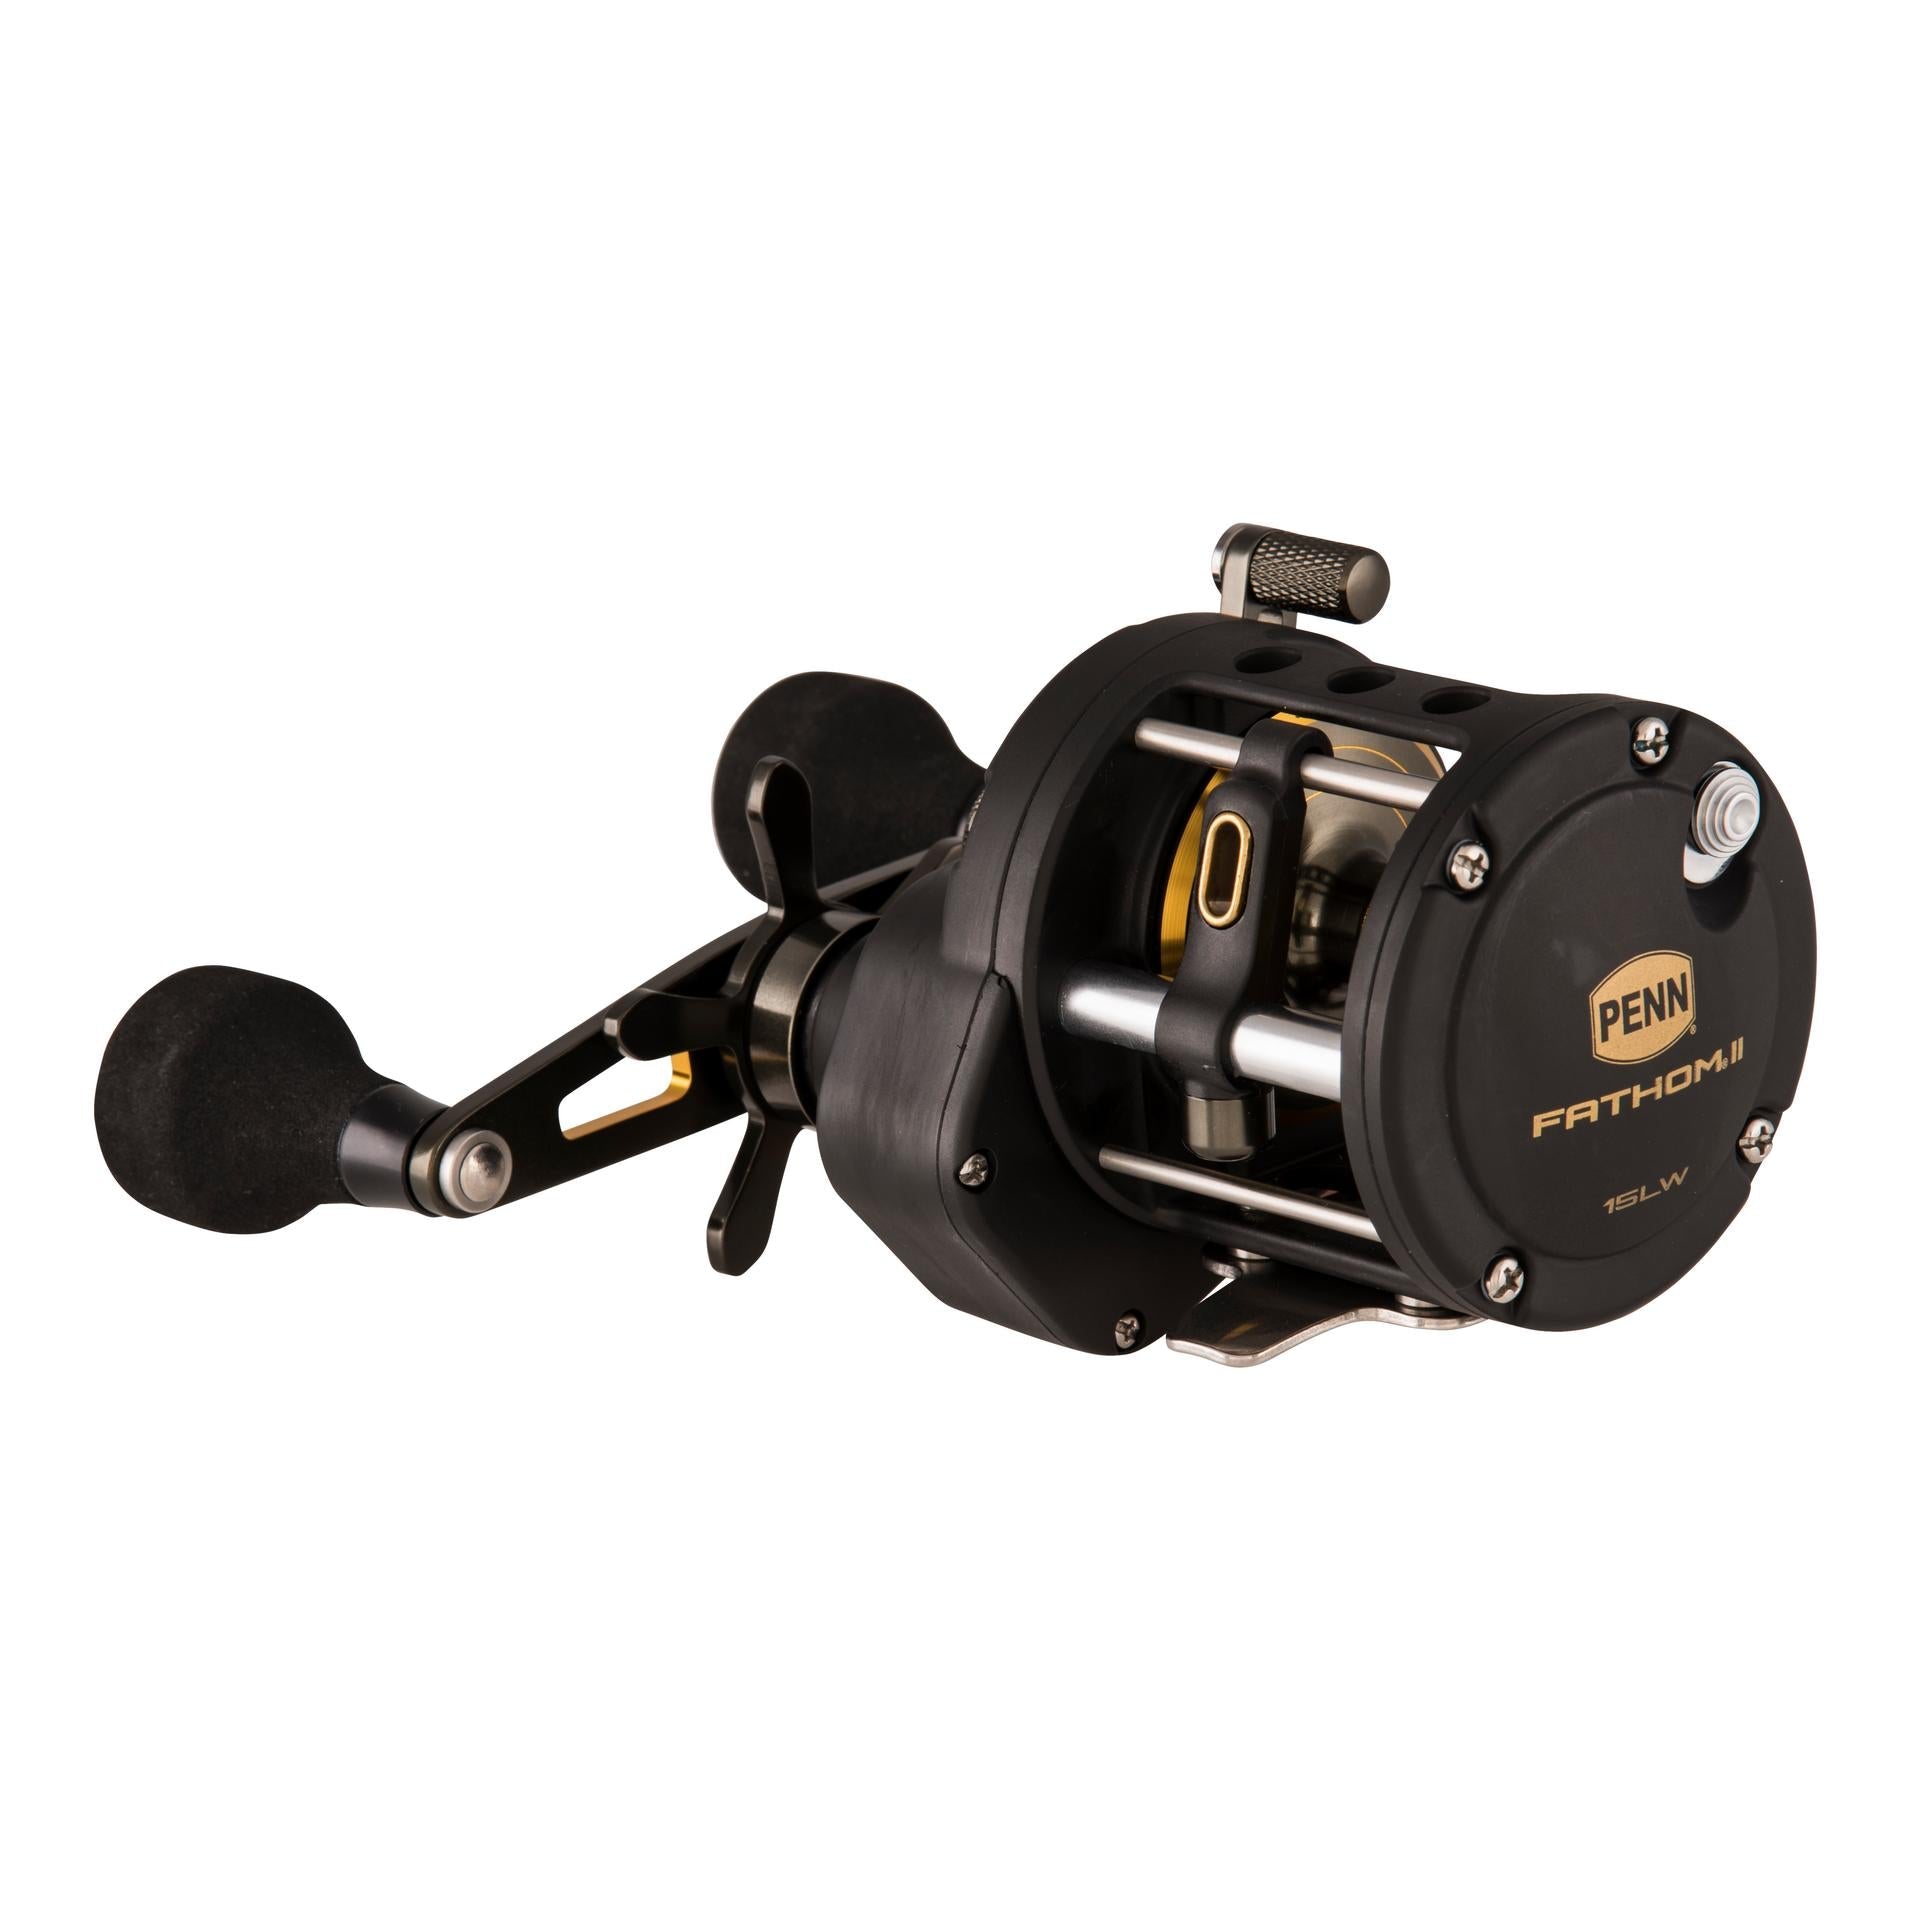 Penn Squall II Level Wind Conventional Fishing Reels, FREE 2-DAY SHIP